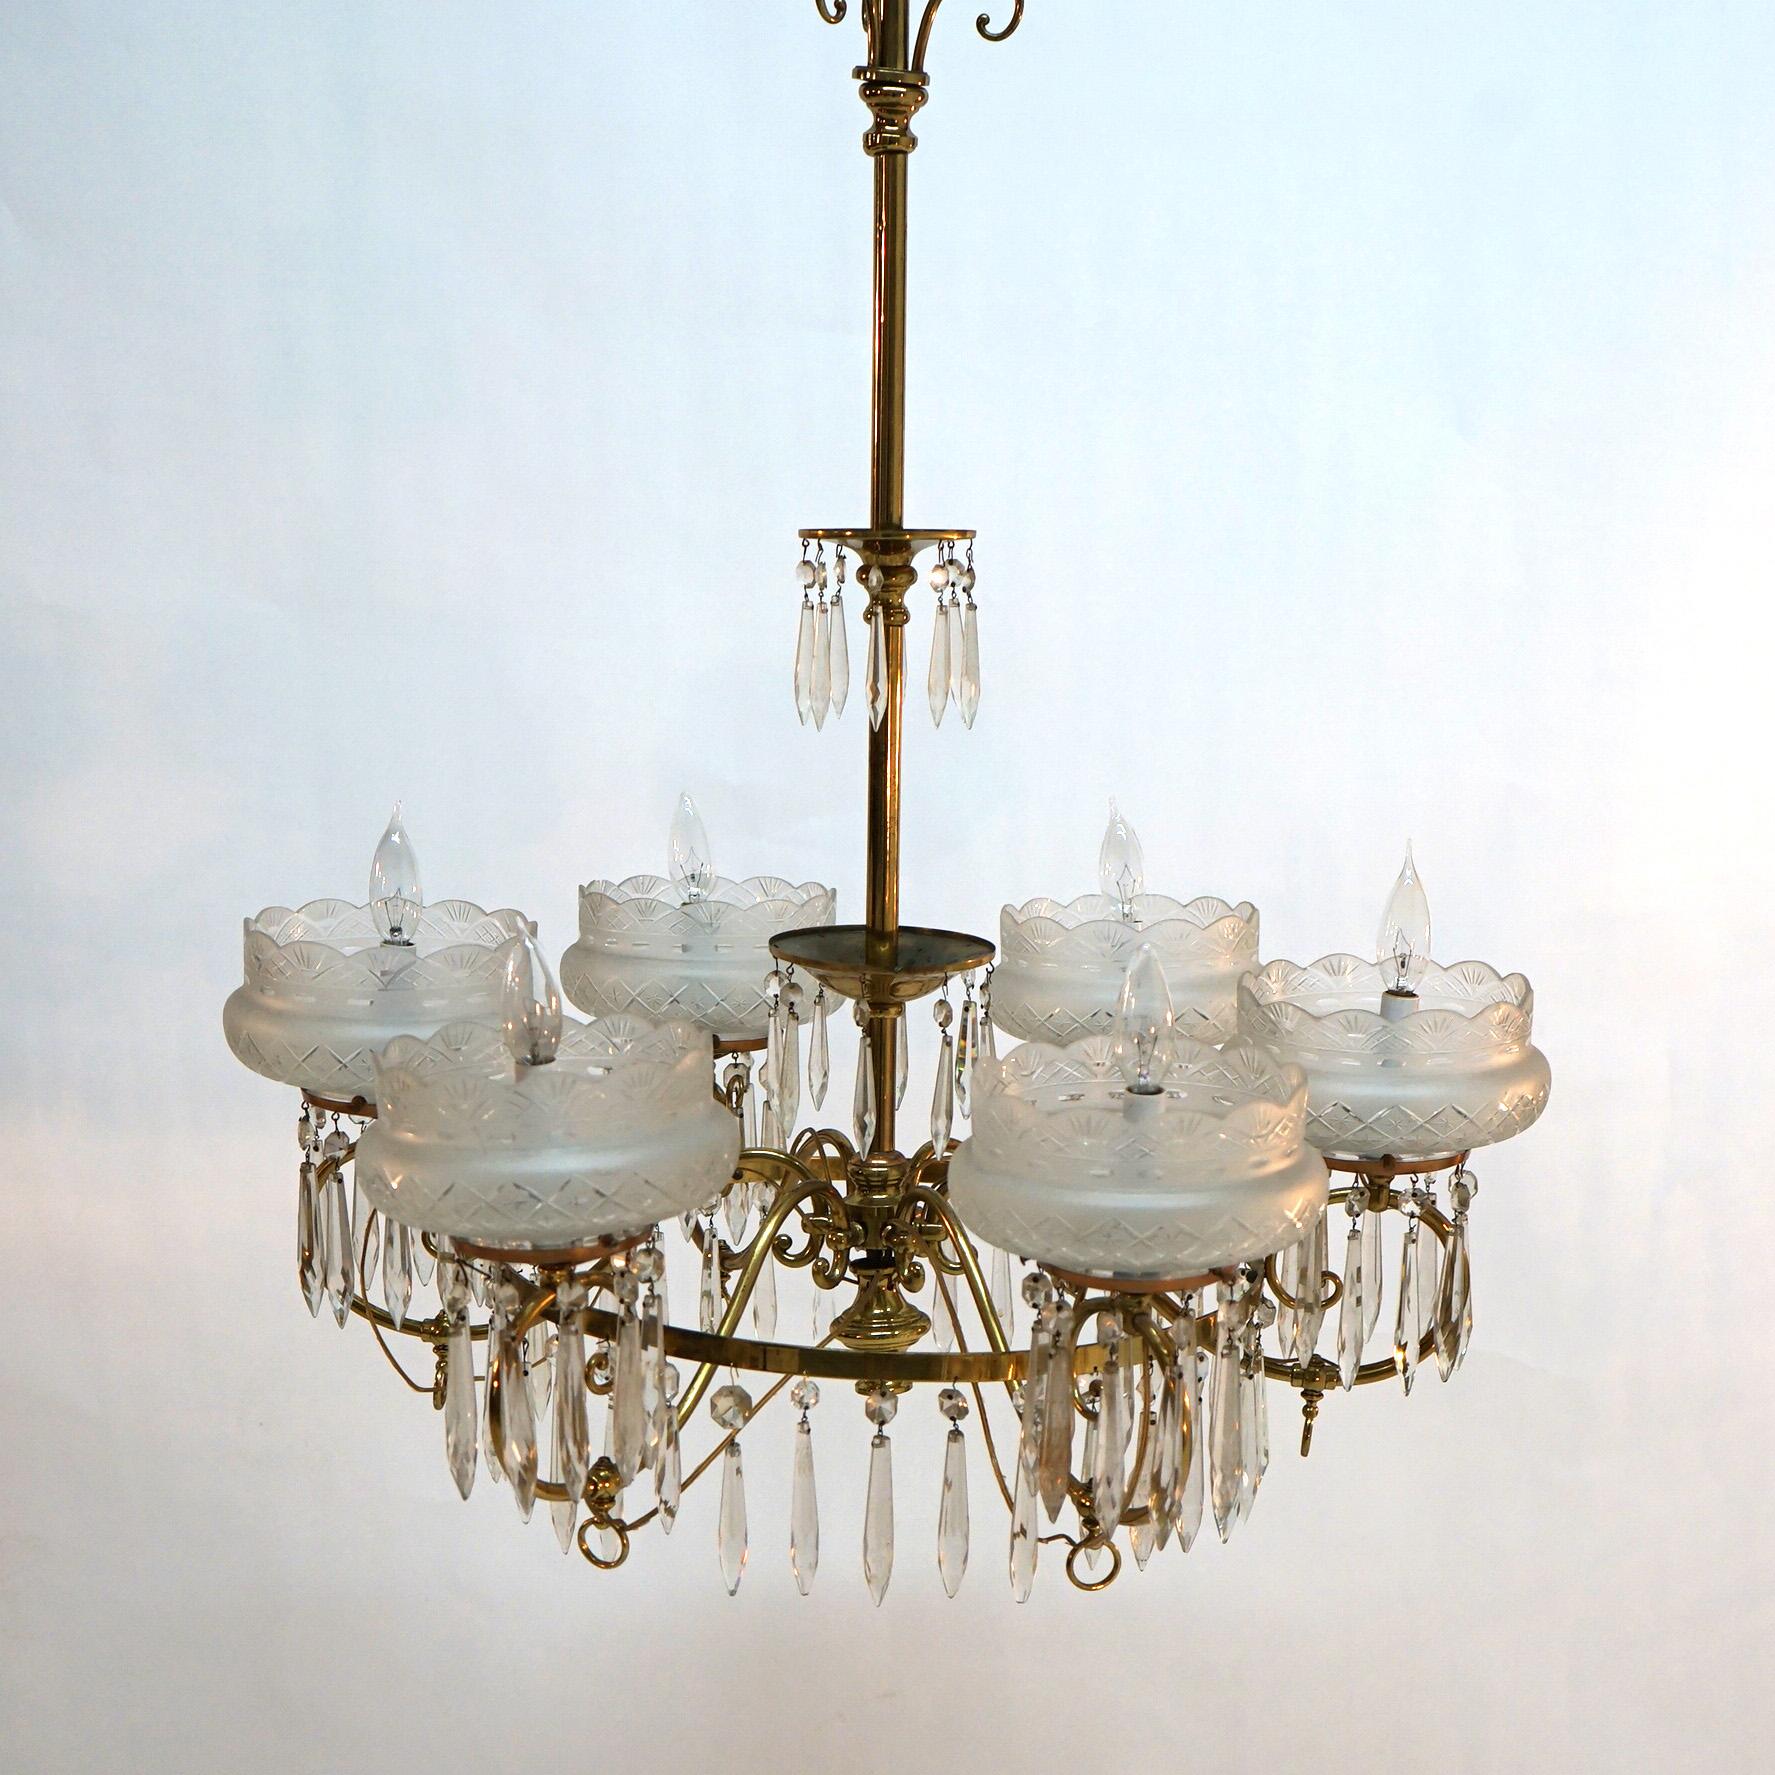 Large Antique Aesthetic Brass Gas Chandelier With Cut Glass Shades & Crystals 15